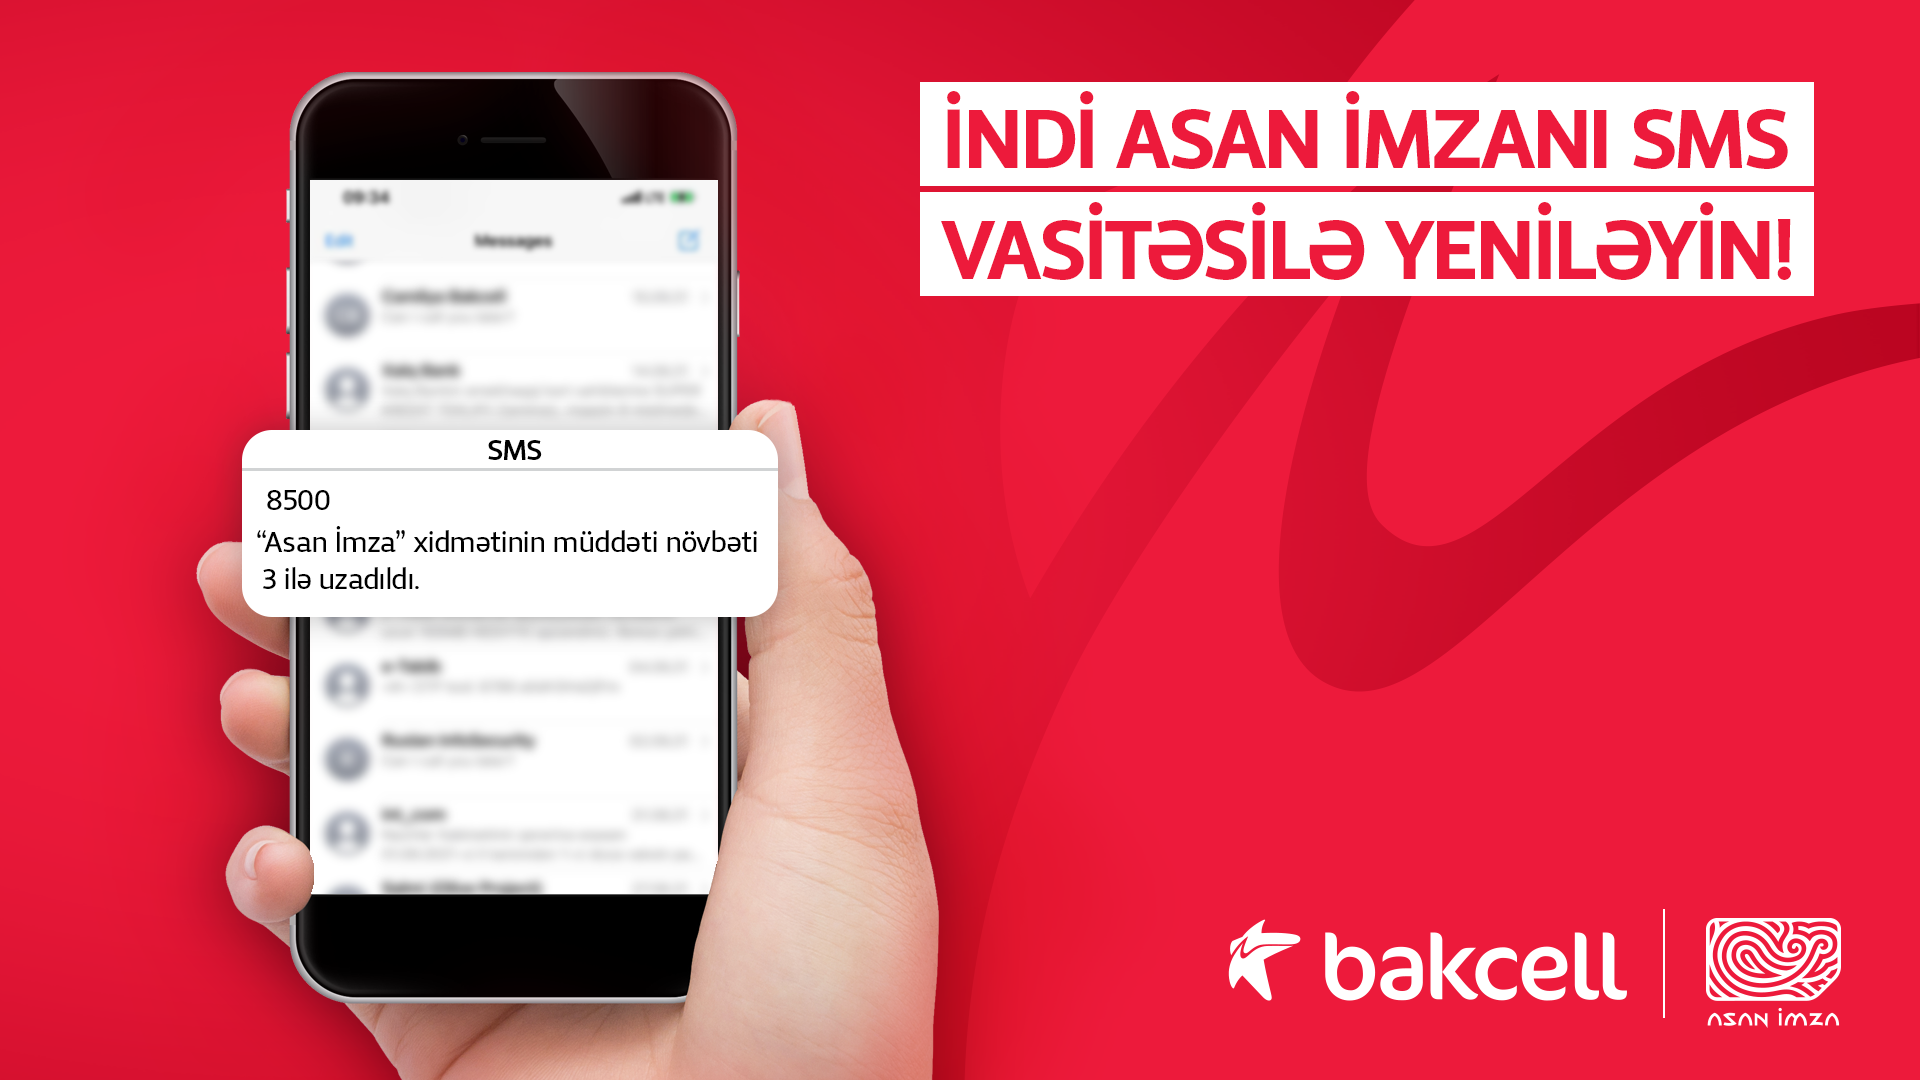 Bakcell subscribers now have the opportunity to renew "Asan Imza" via SMS